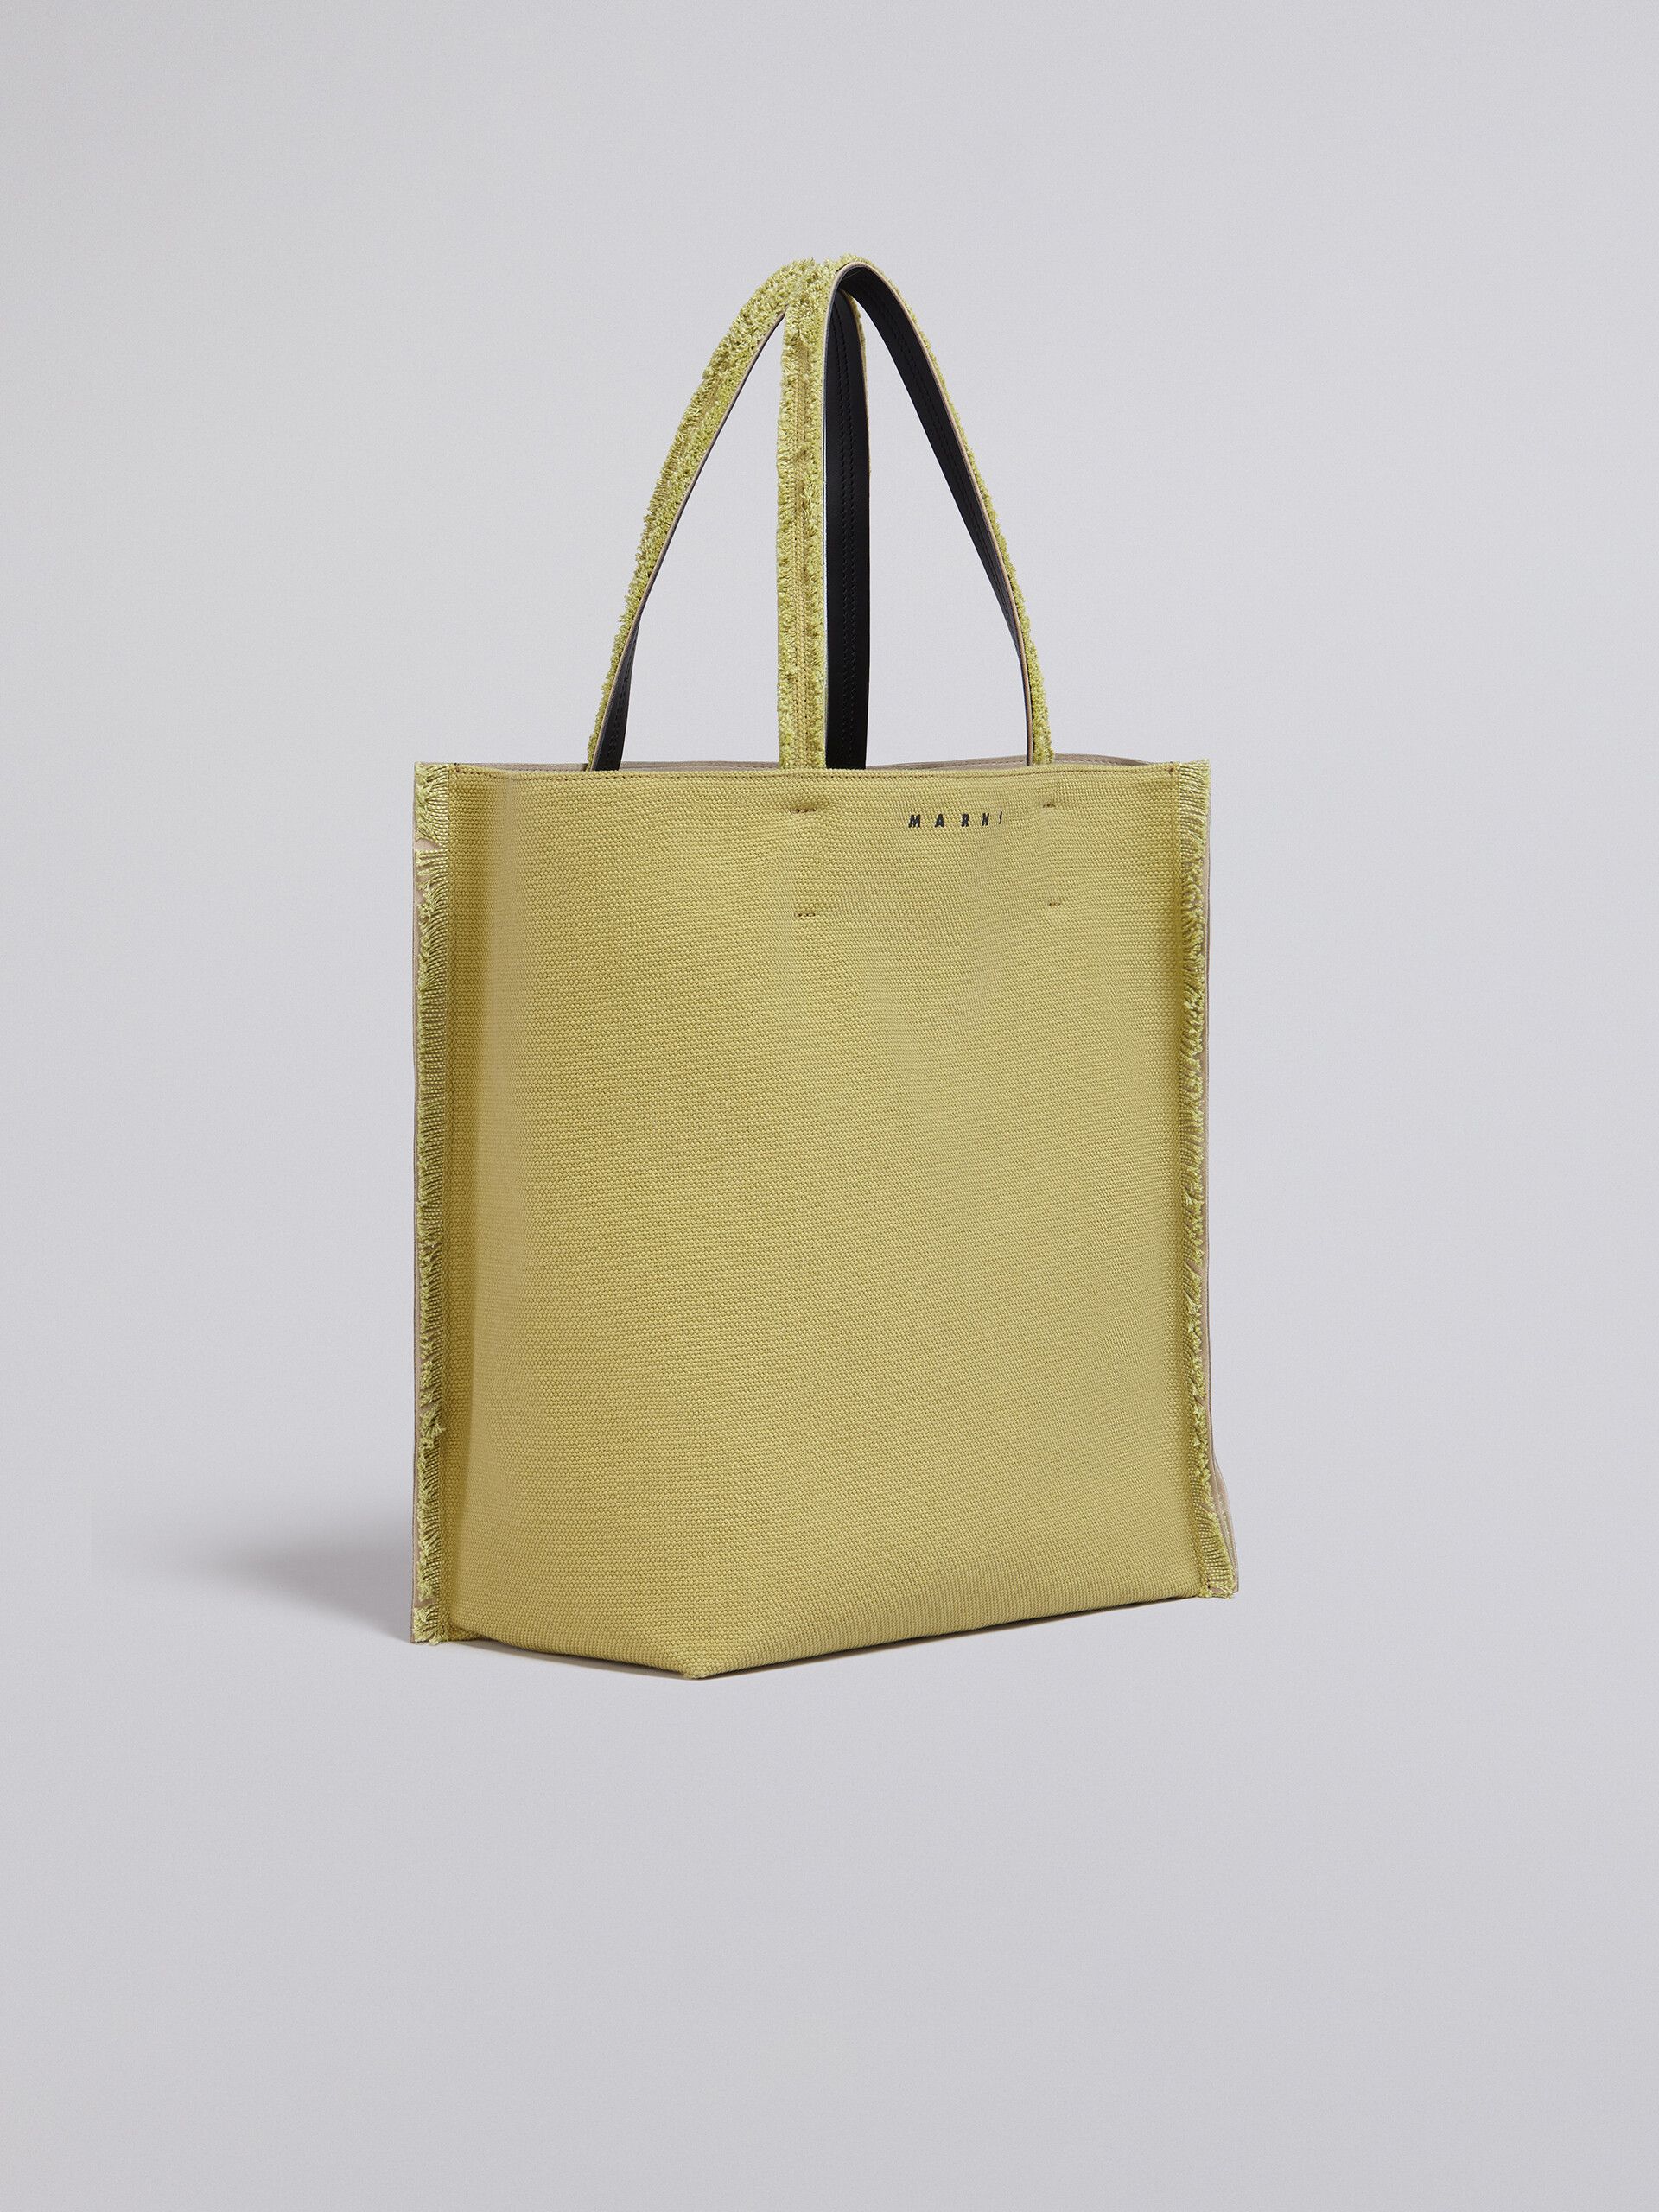 Yellow and brown leather canvas MUSEO SOFT  bag - Shopping Bags - Image 6